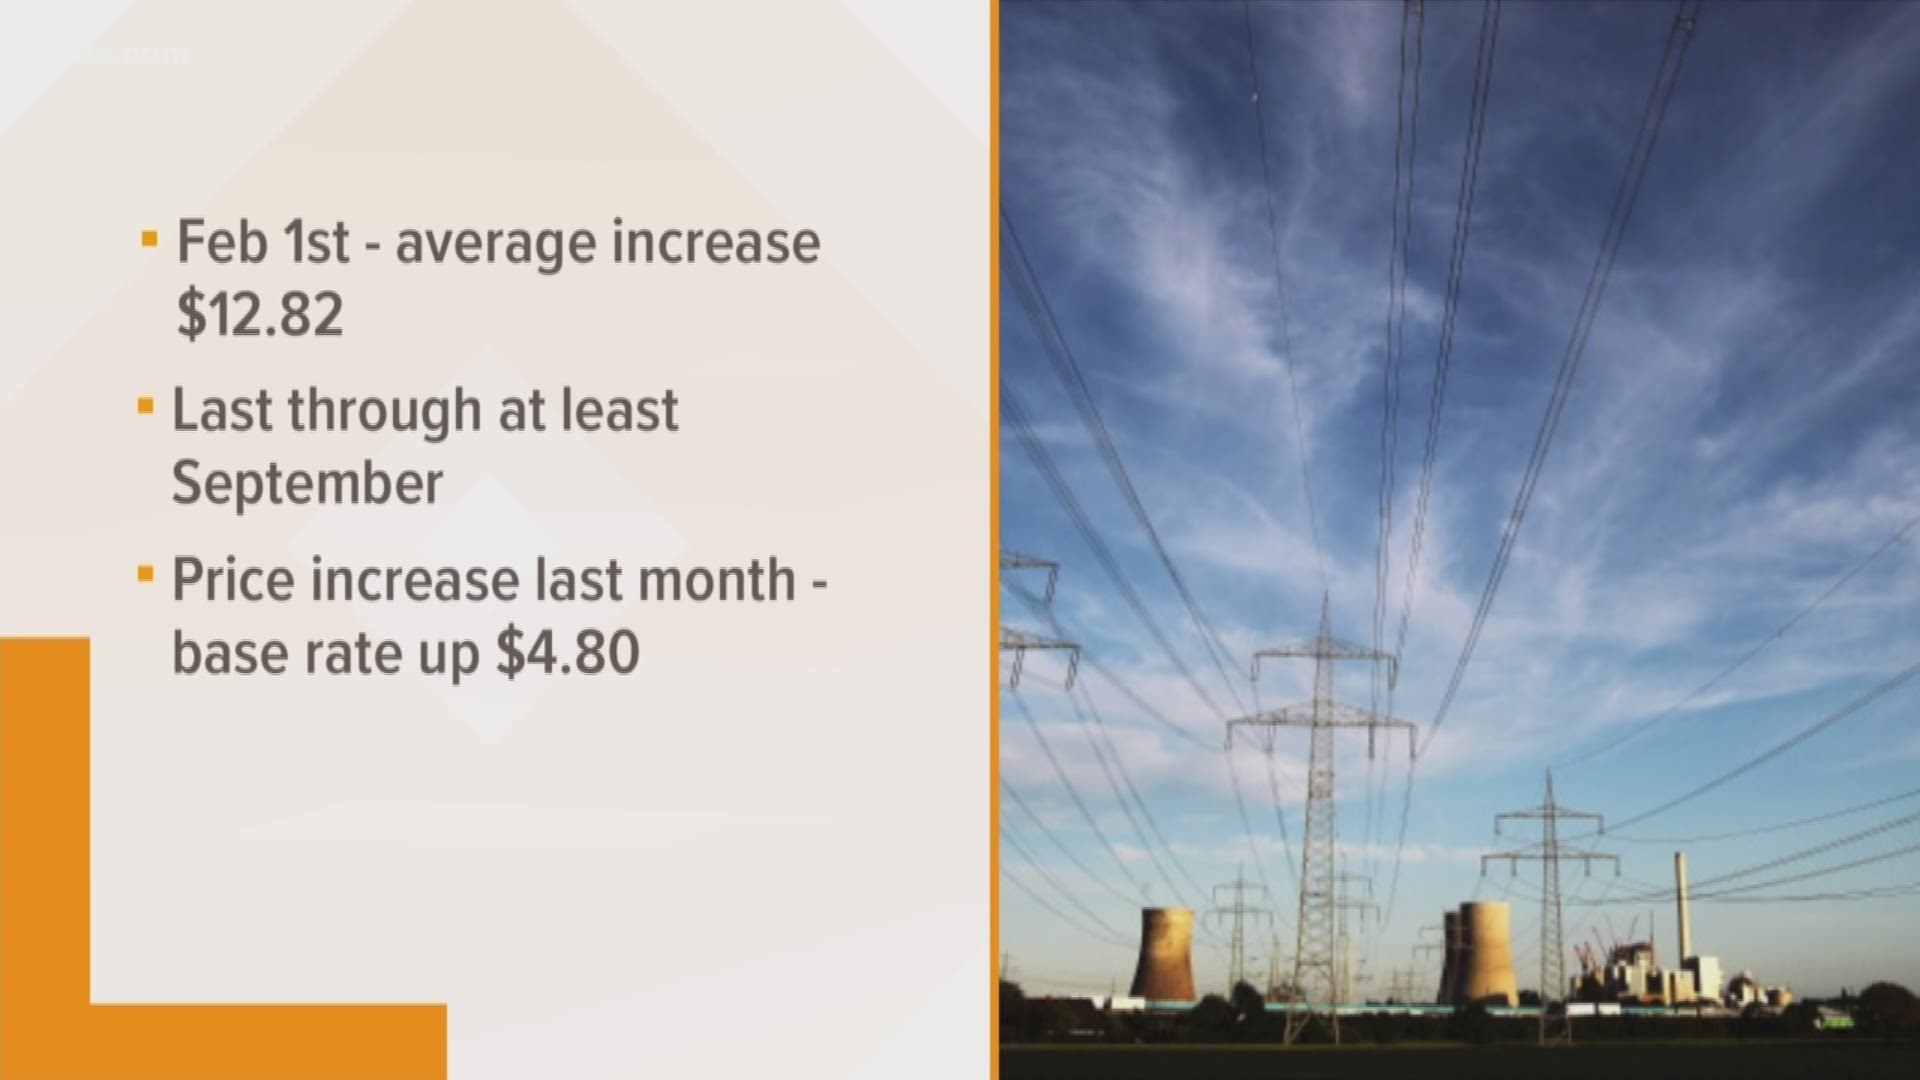 Starting February 1, energy rates are going up by quite a bit.
The average utility bill will go up by $12.82.